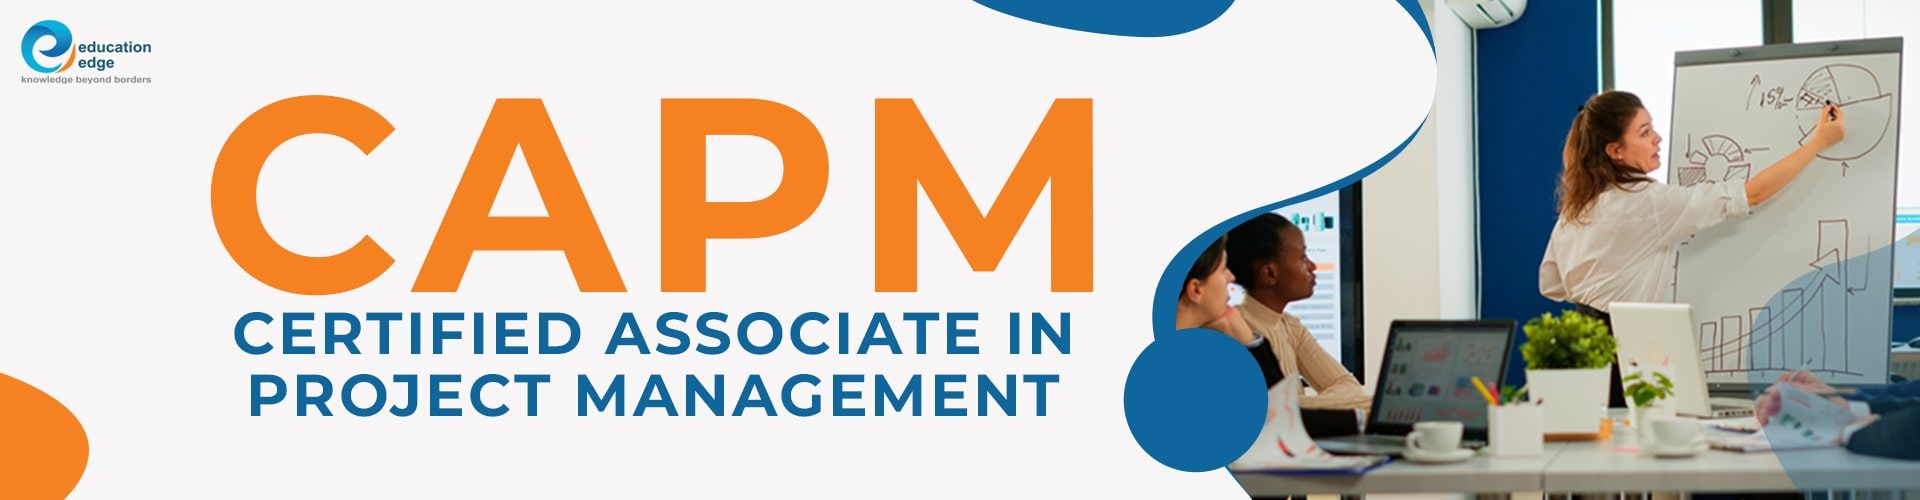 CAPM Certified Associate in Project Management